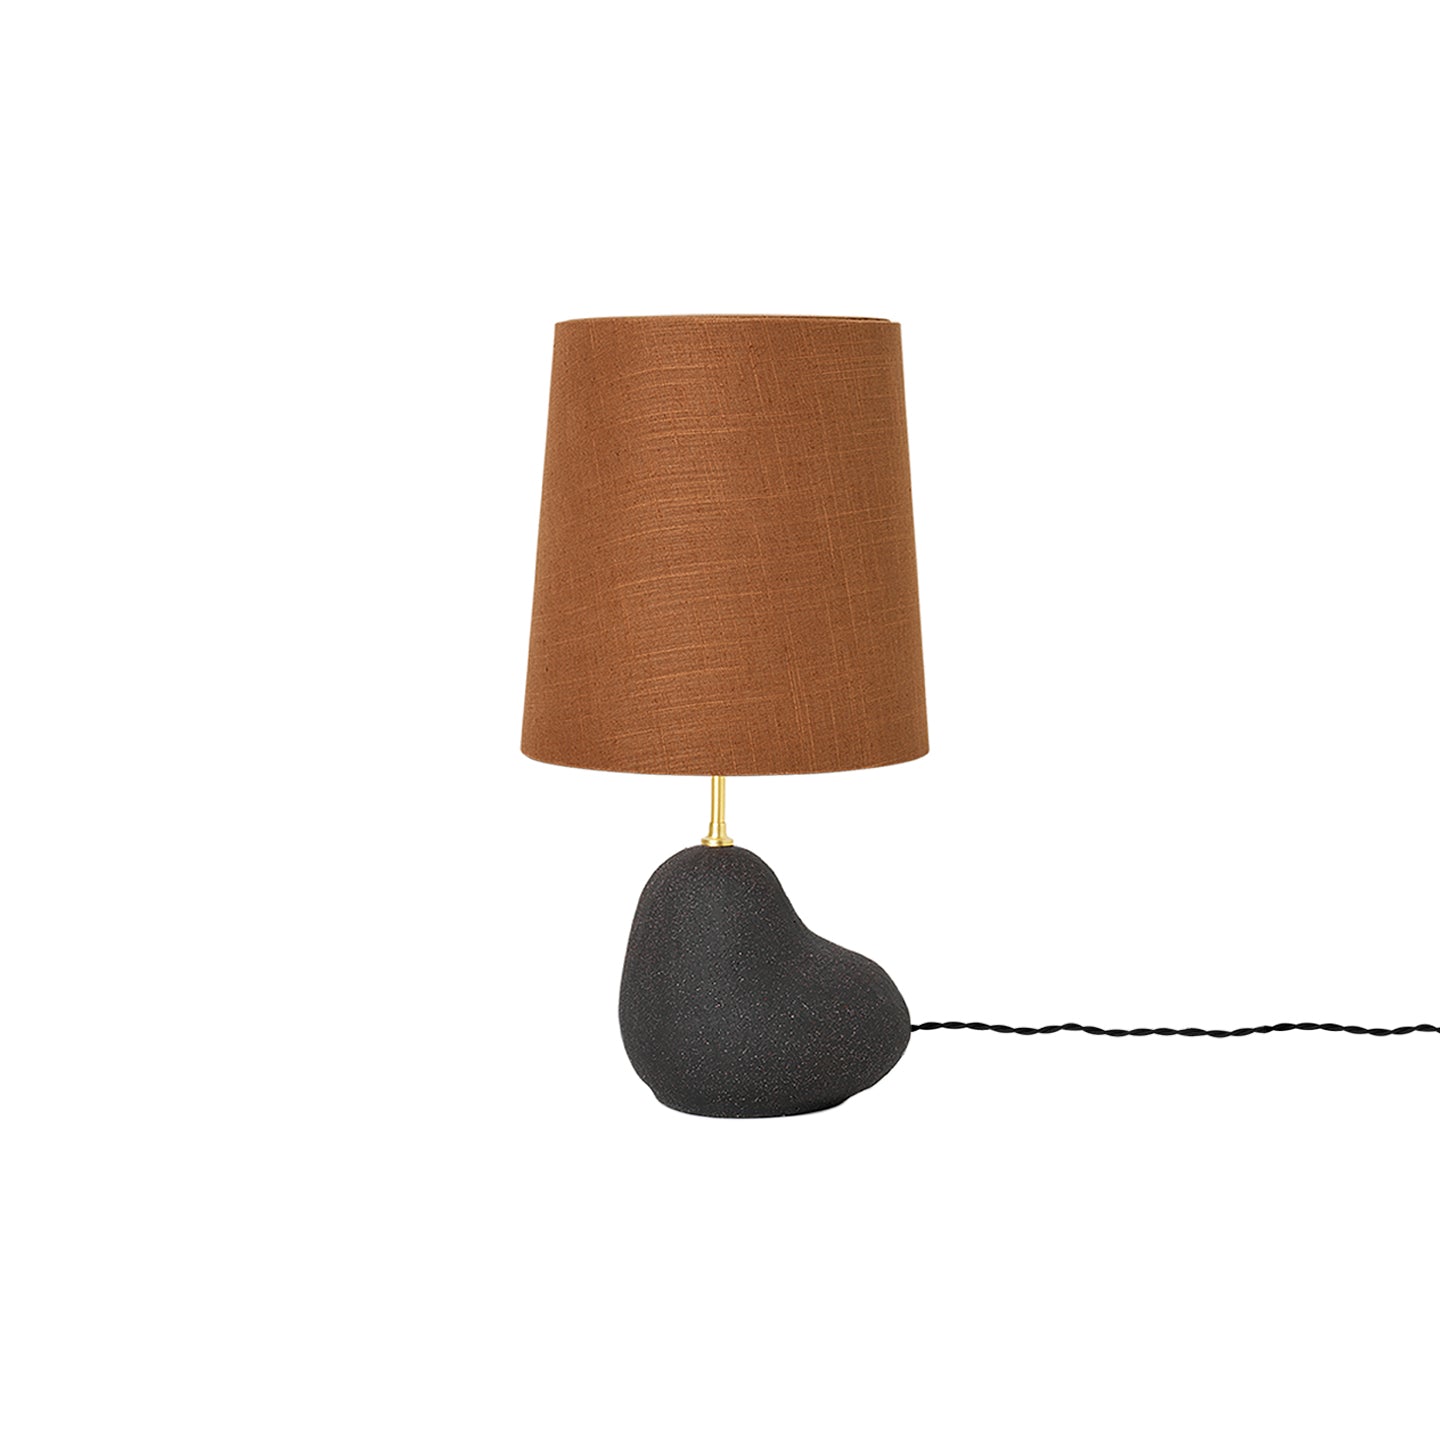 Hebe Lamp: Short + Curry + Black